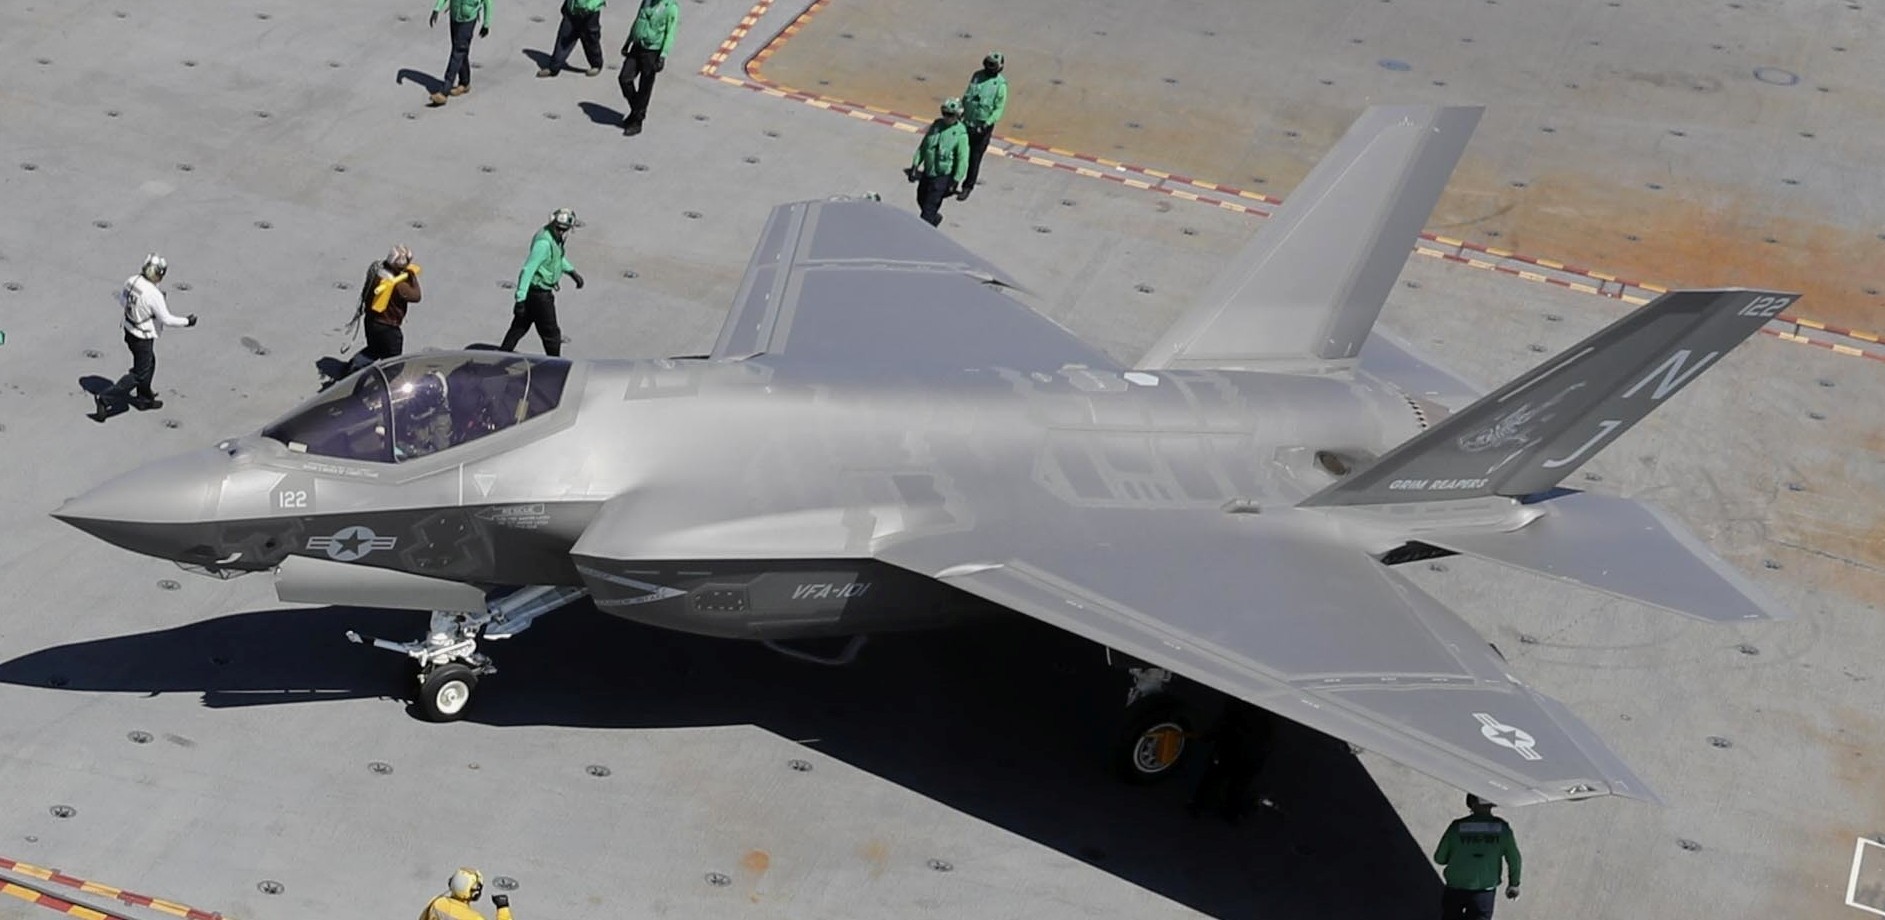 vfa-101 grim reapers strike fighter squadron us navy f-35c lightning jsf frs 21